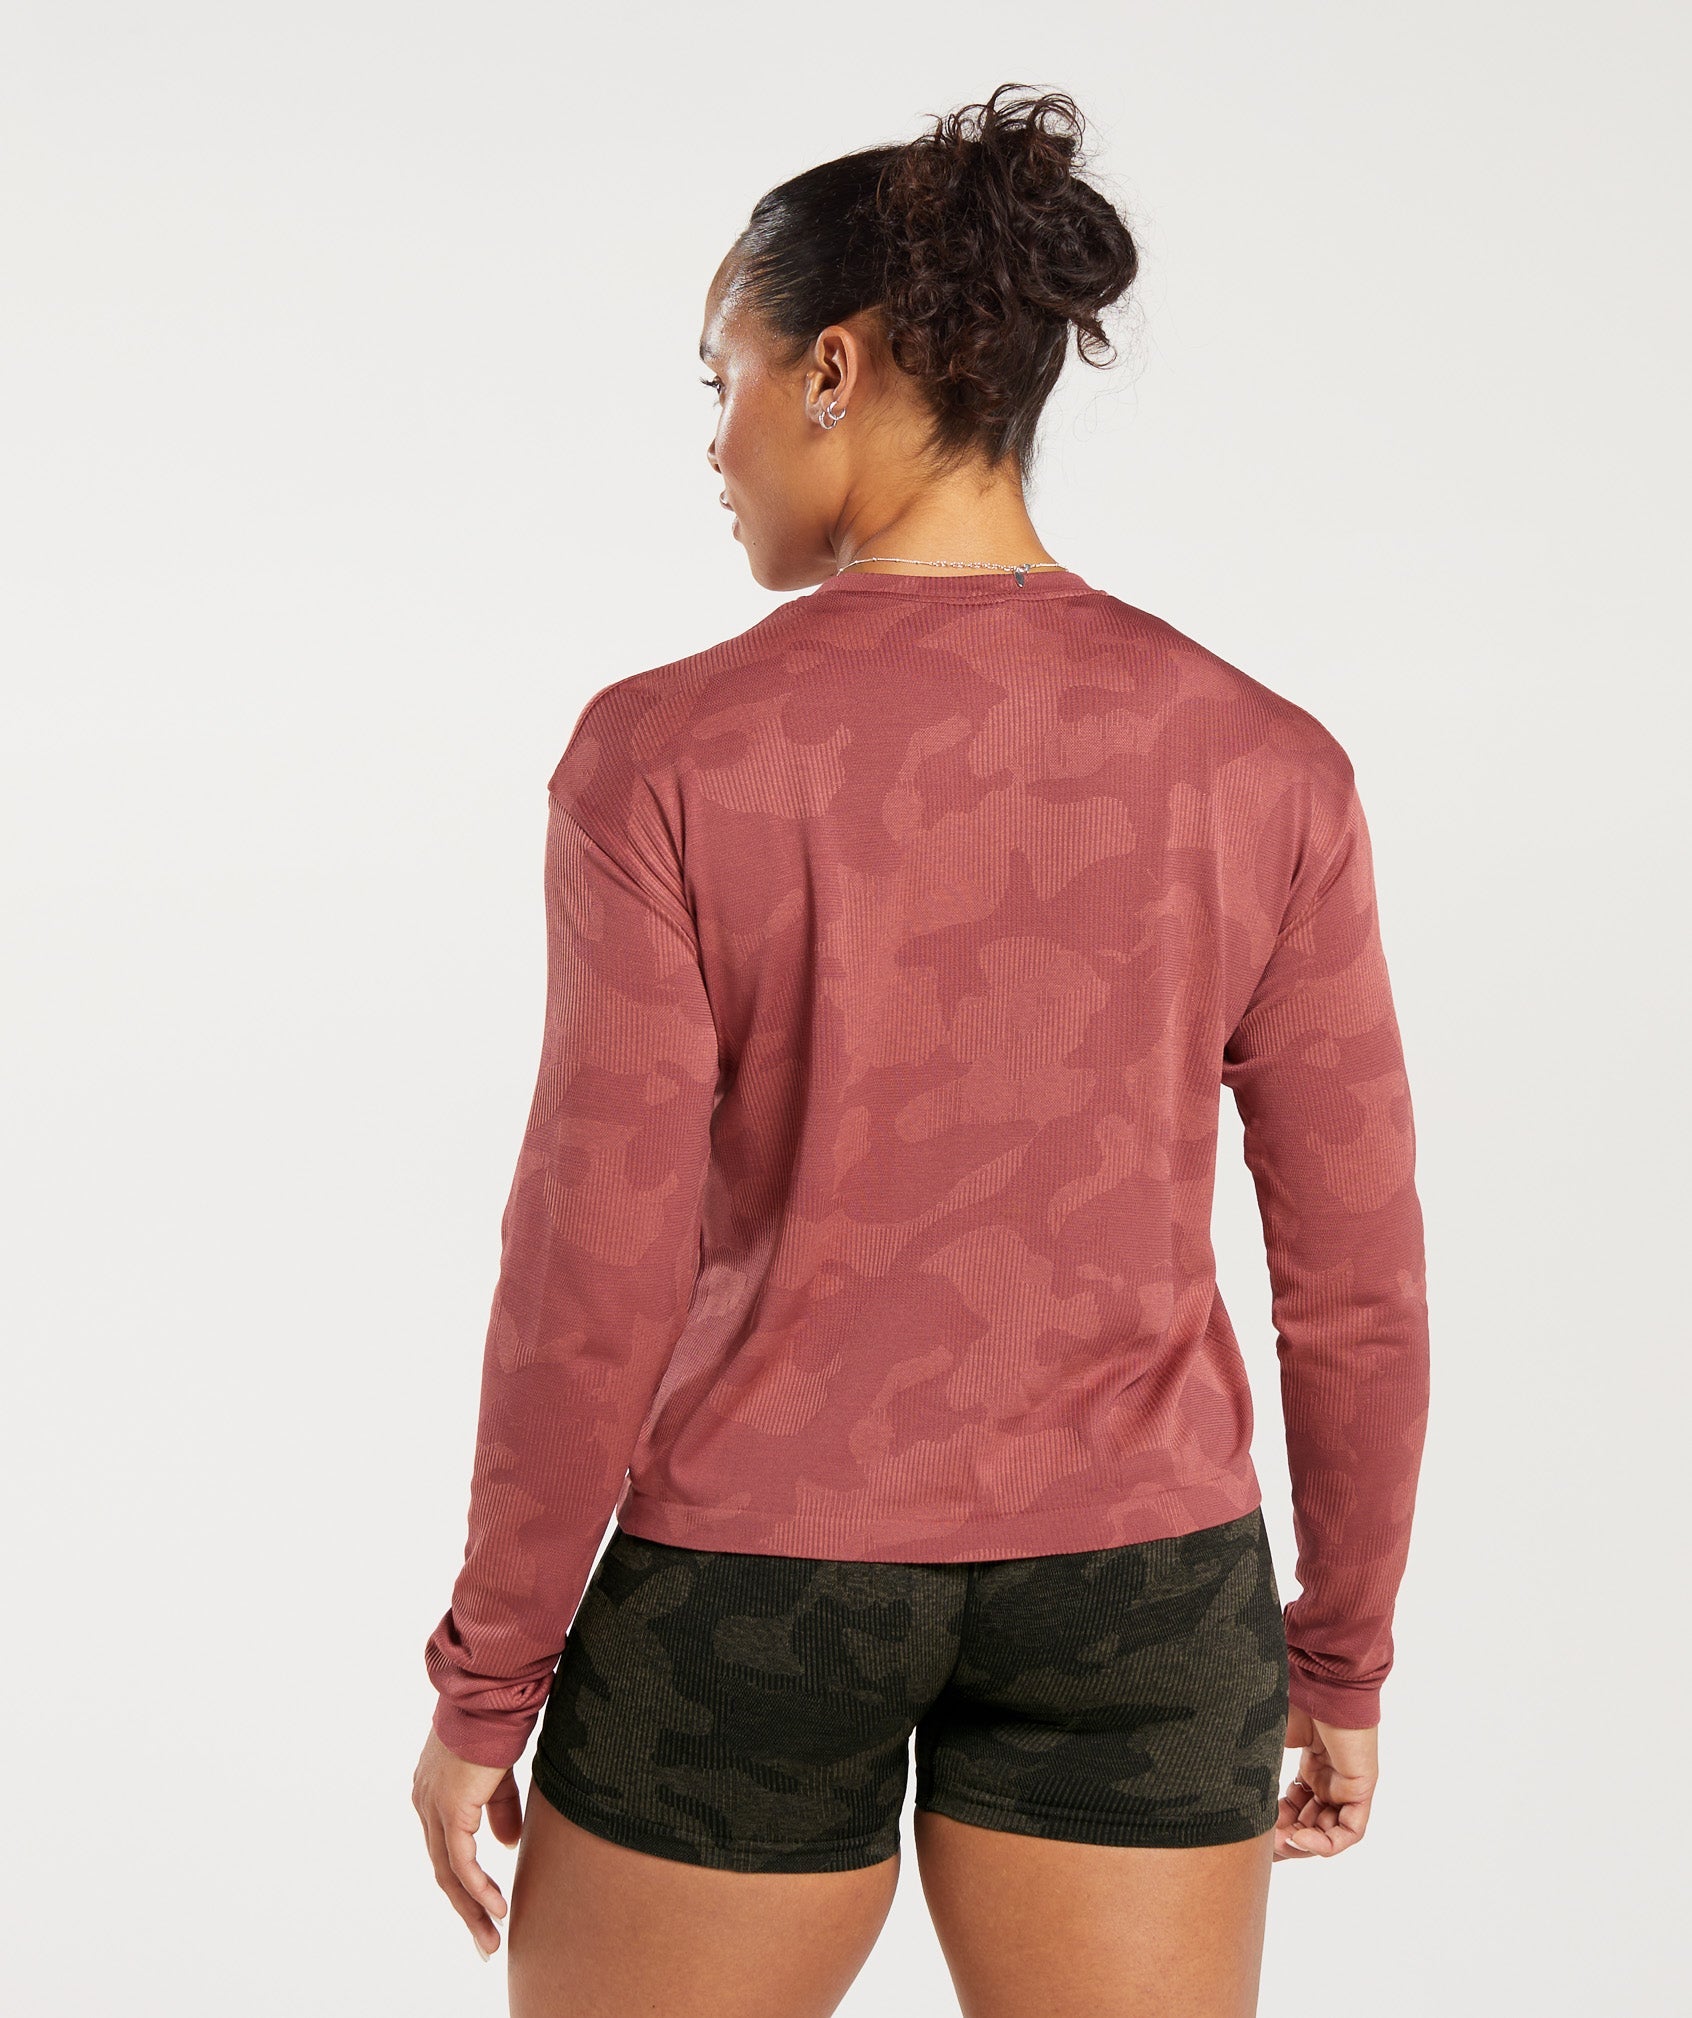 Adapt Camo Seamless Ribbed Long Sleeve Top in Soft Berry/Sunbaked Pink - view 2